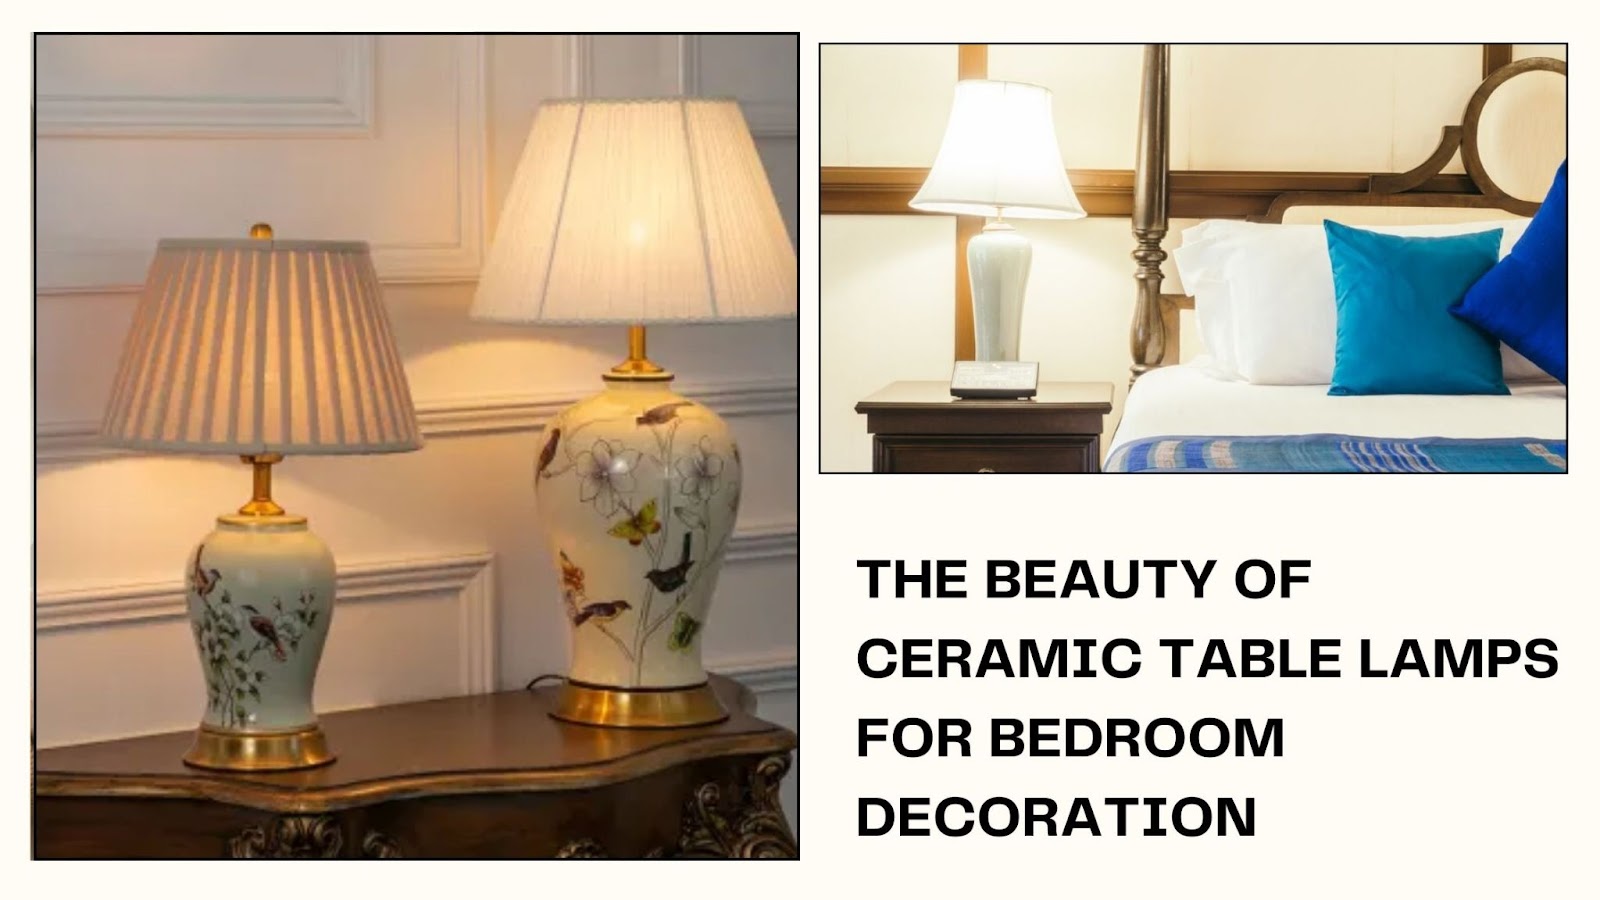 The Beauty of Ceramic Table Lamps for Bedroom Decoration